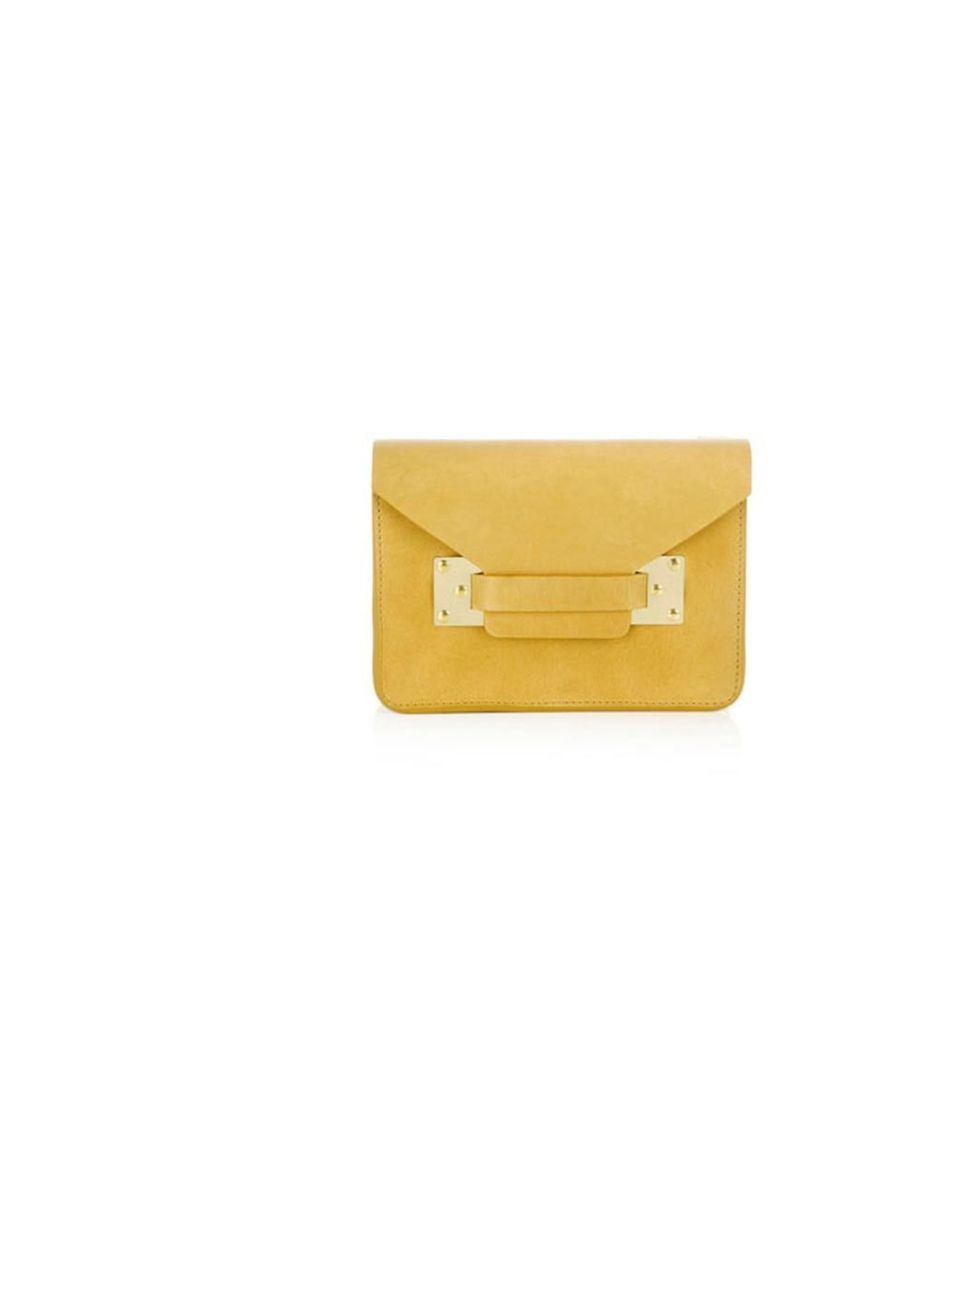 <p>Sophie Hulme mini envelope bag, £248, at <a href="http://www.matchesfashion.com/product/127297">Matches Fashion</a></p>